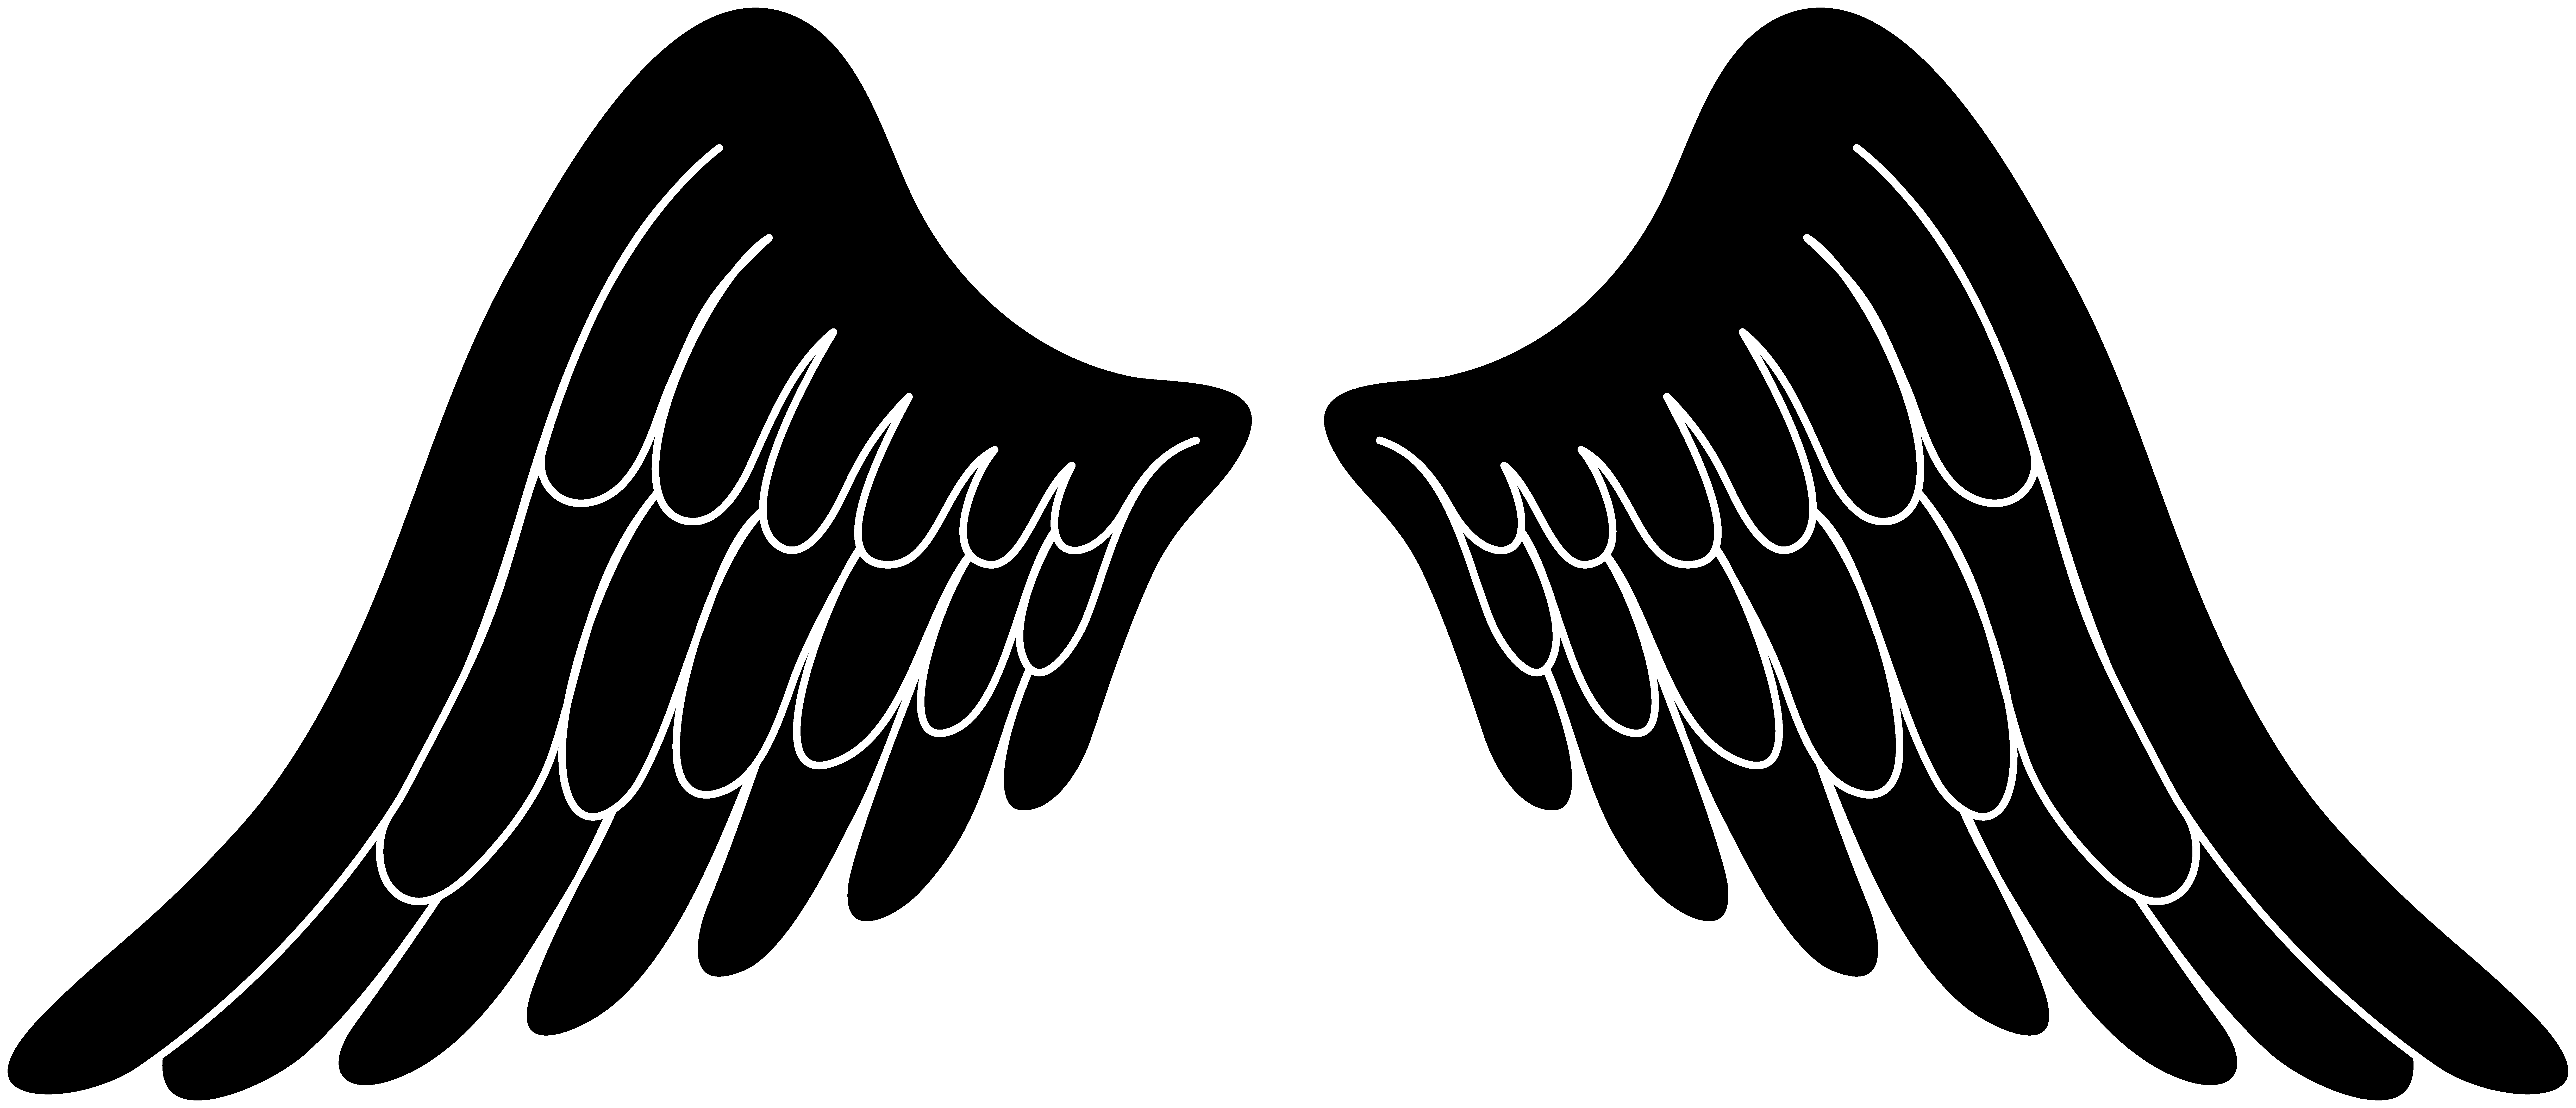 angel-wings-free-angel-wing-clip-art-free-vector-for-free-download